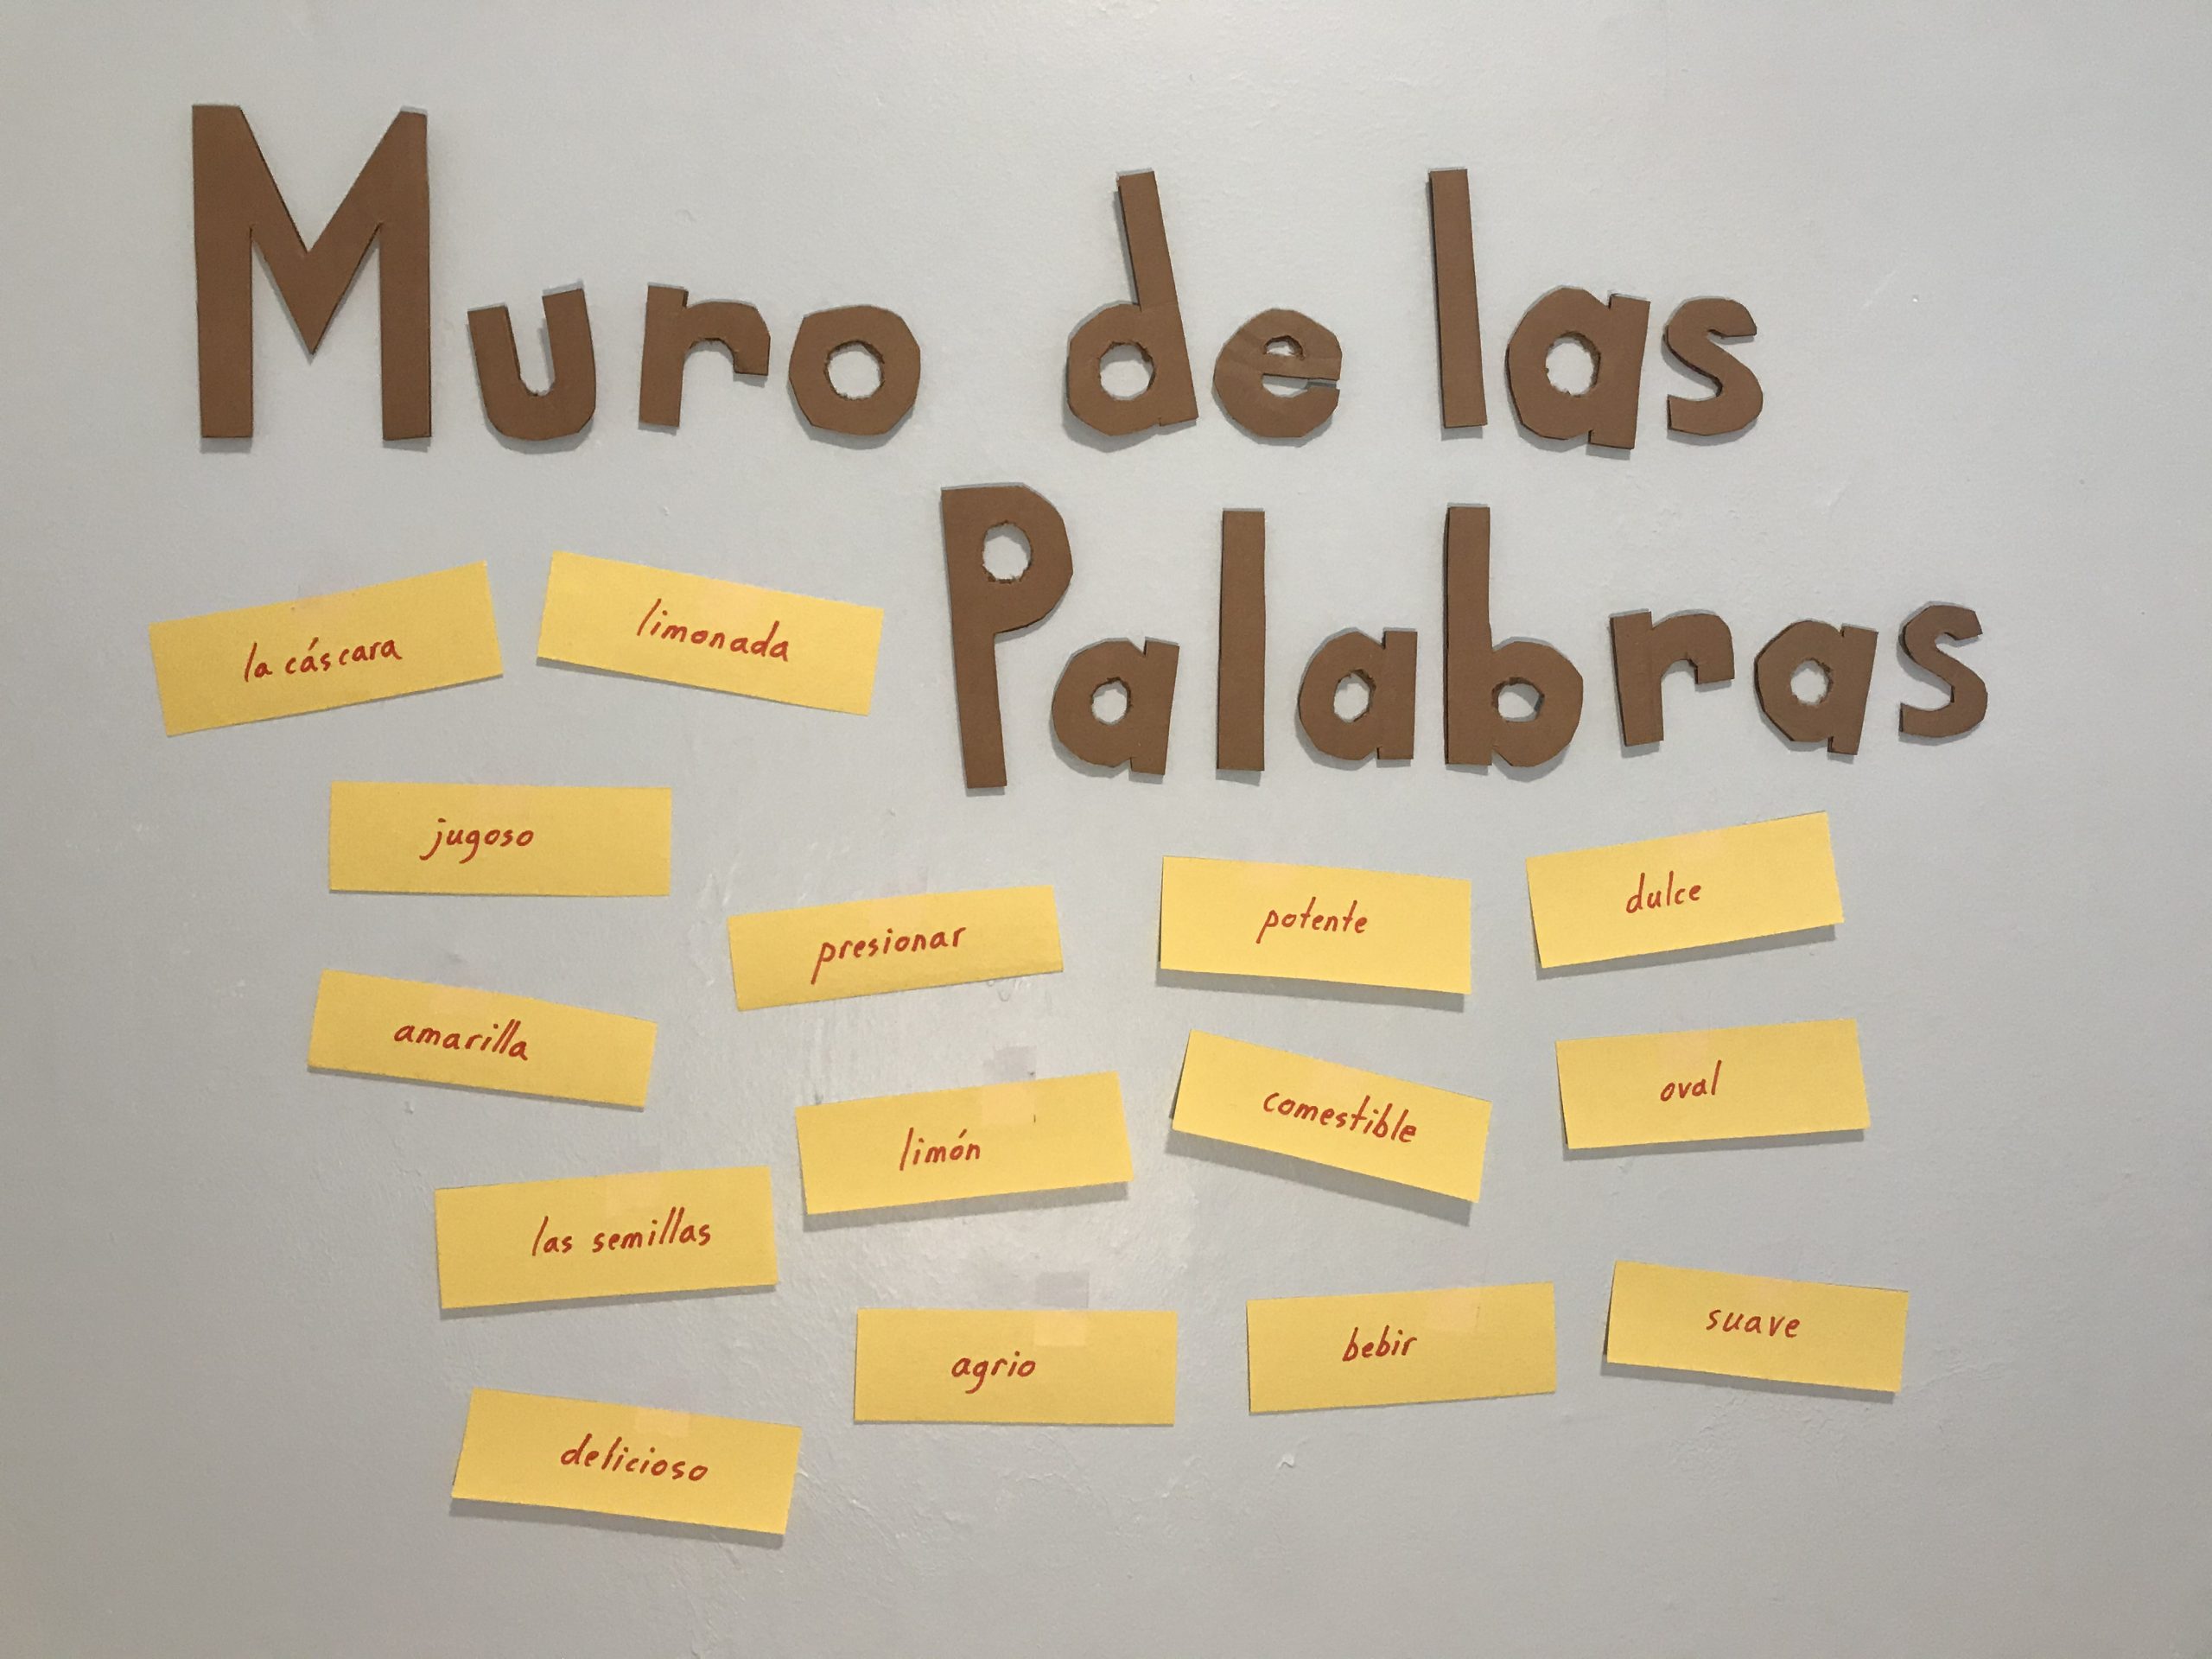 A Muro de las Palabra: several words written on cards and hanging on a wall